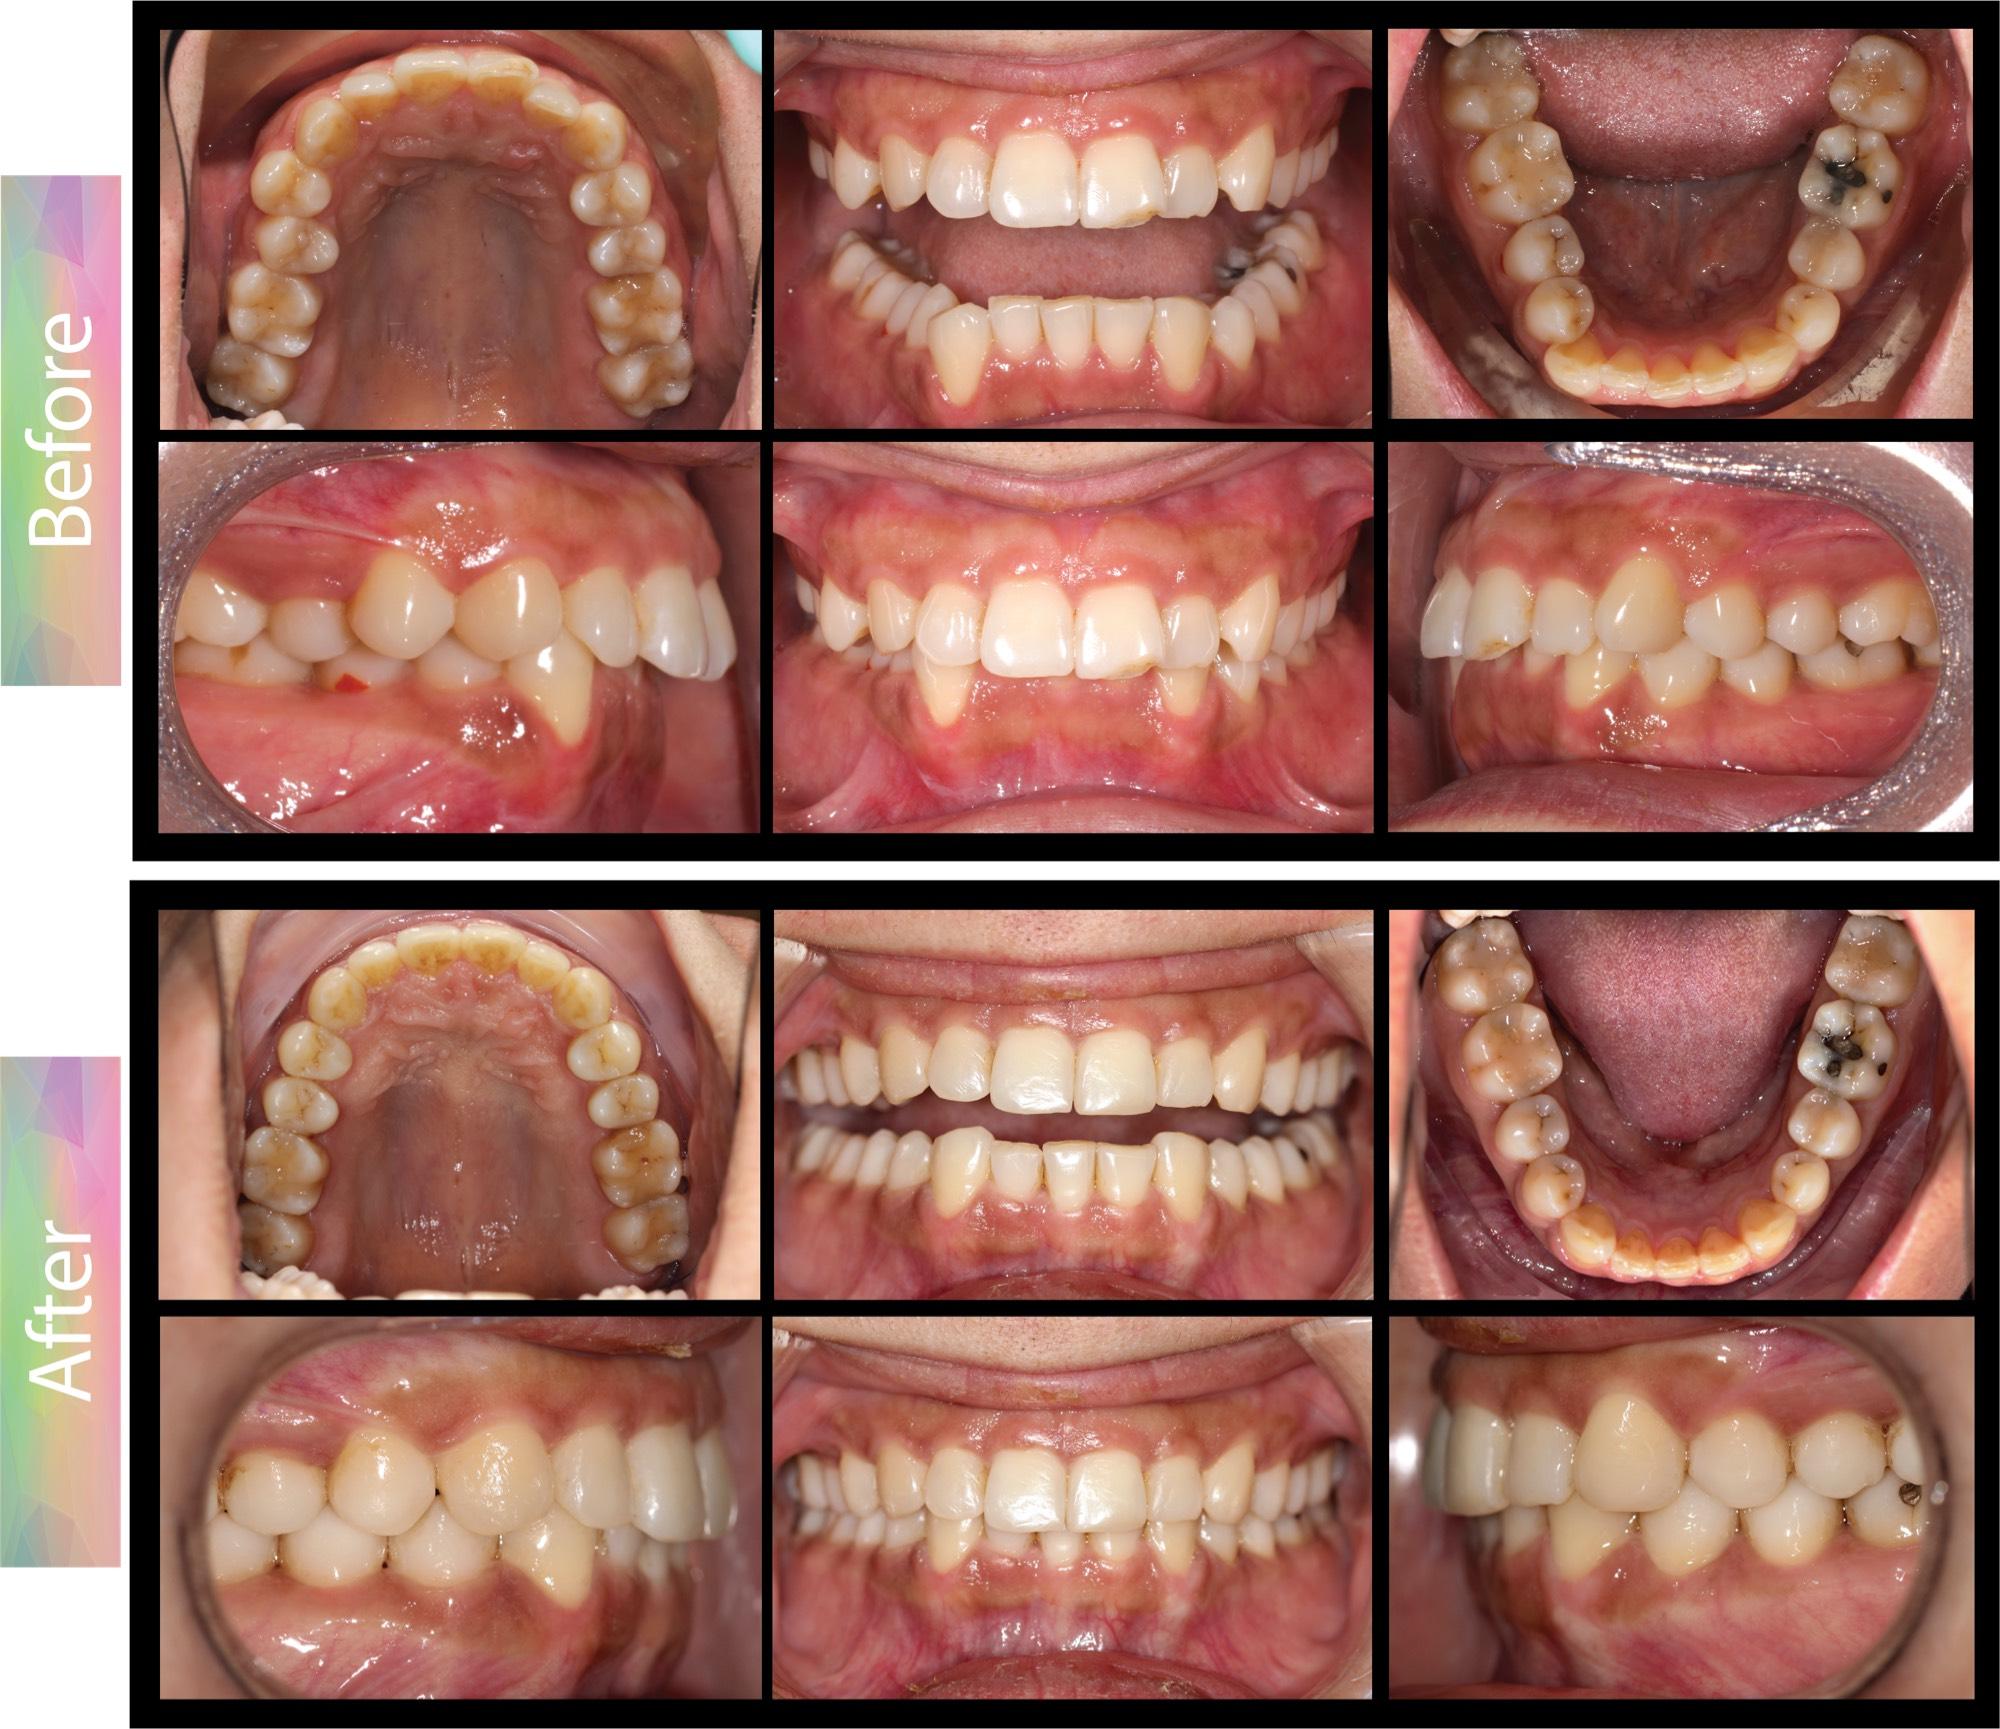 OrthoBoutique - CASE #8 Deep Overbite (missing one lower incisor) Before and After